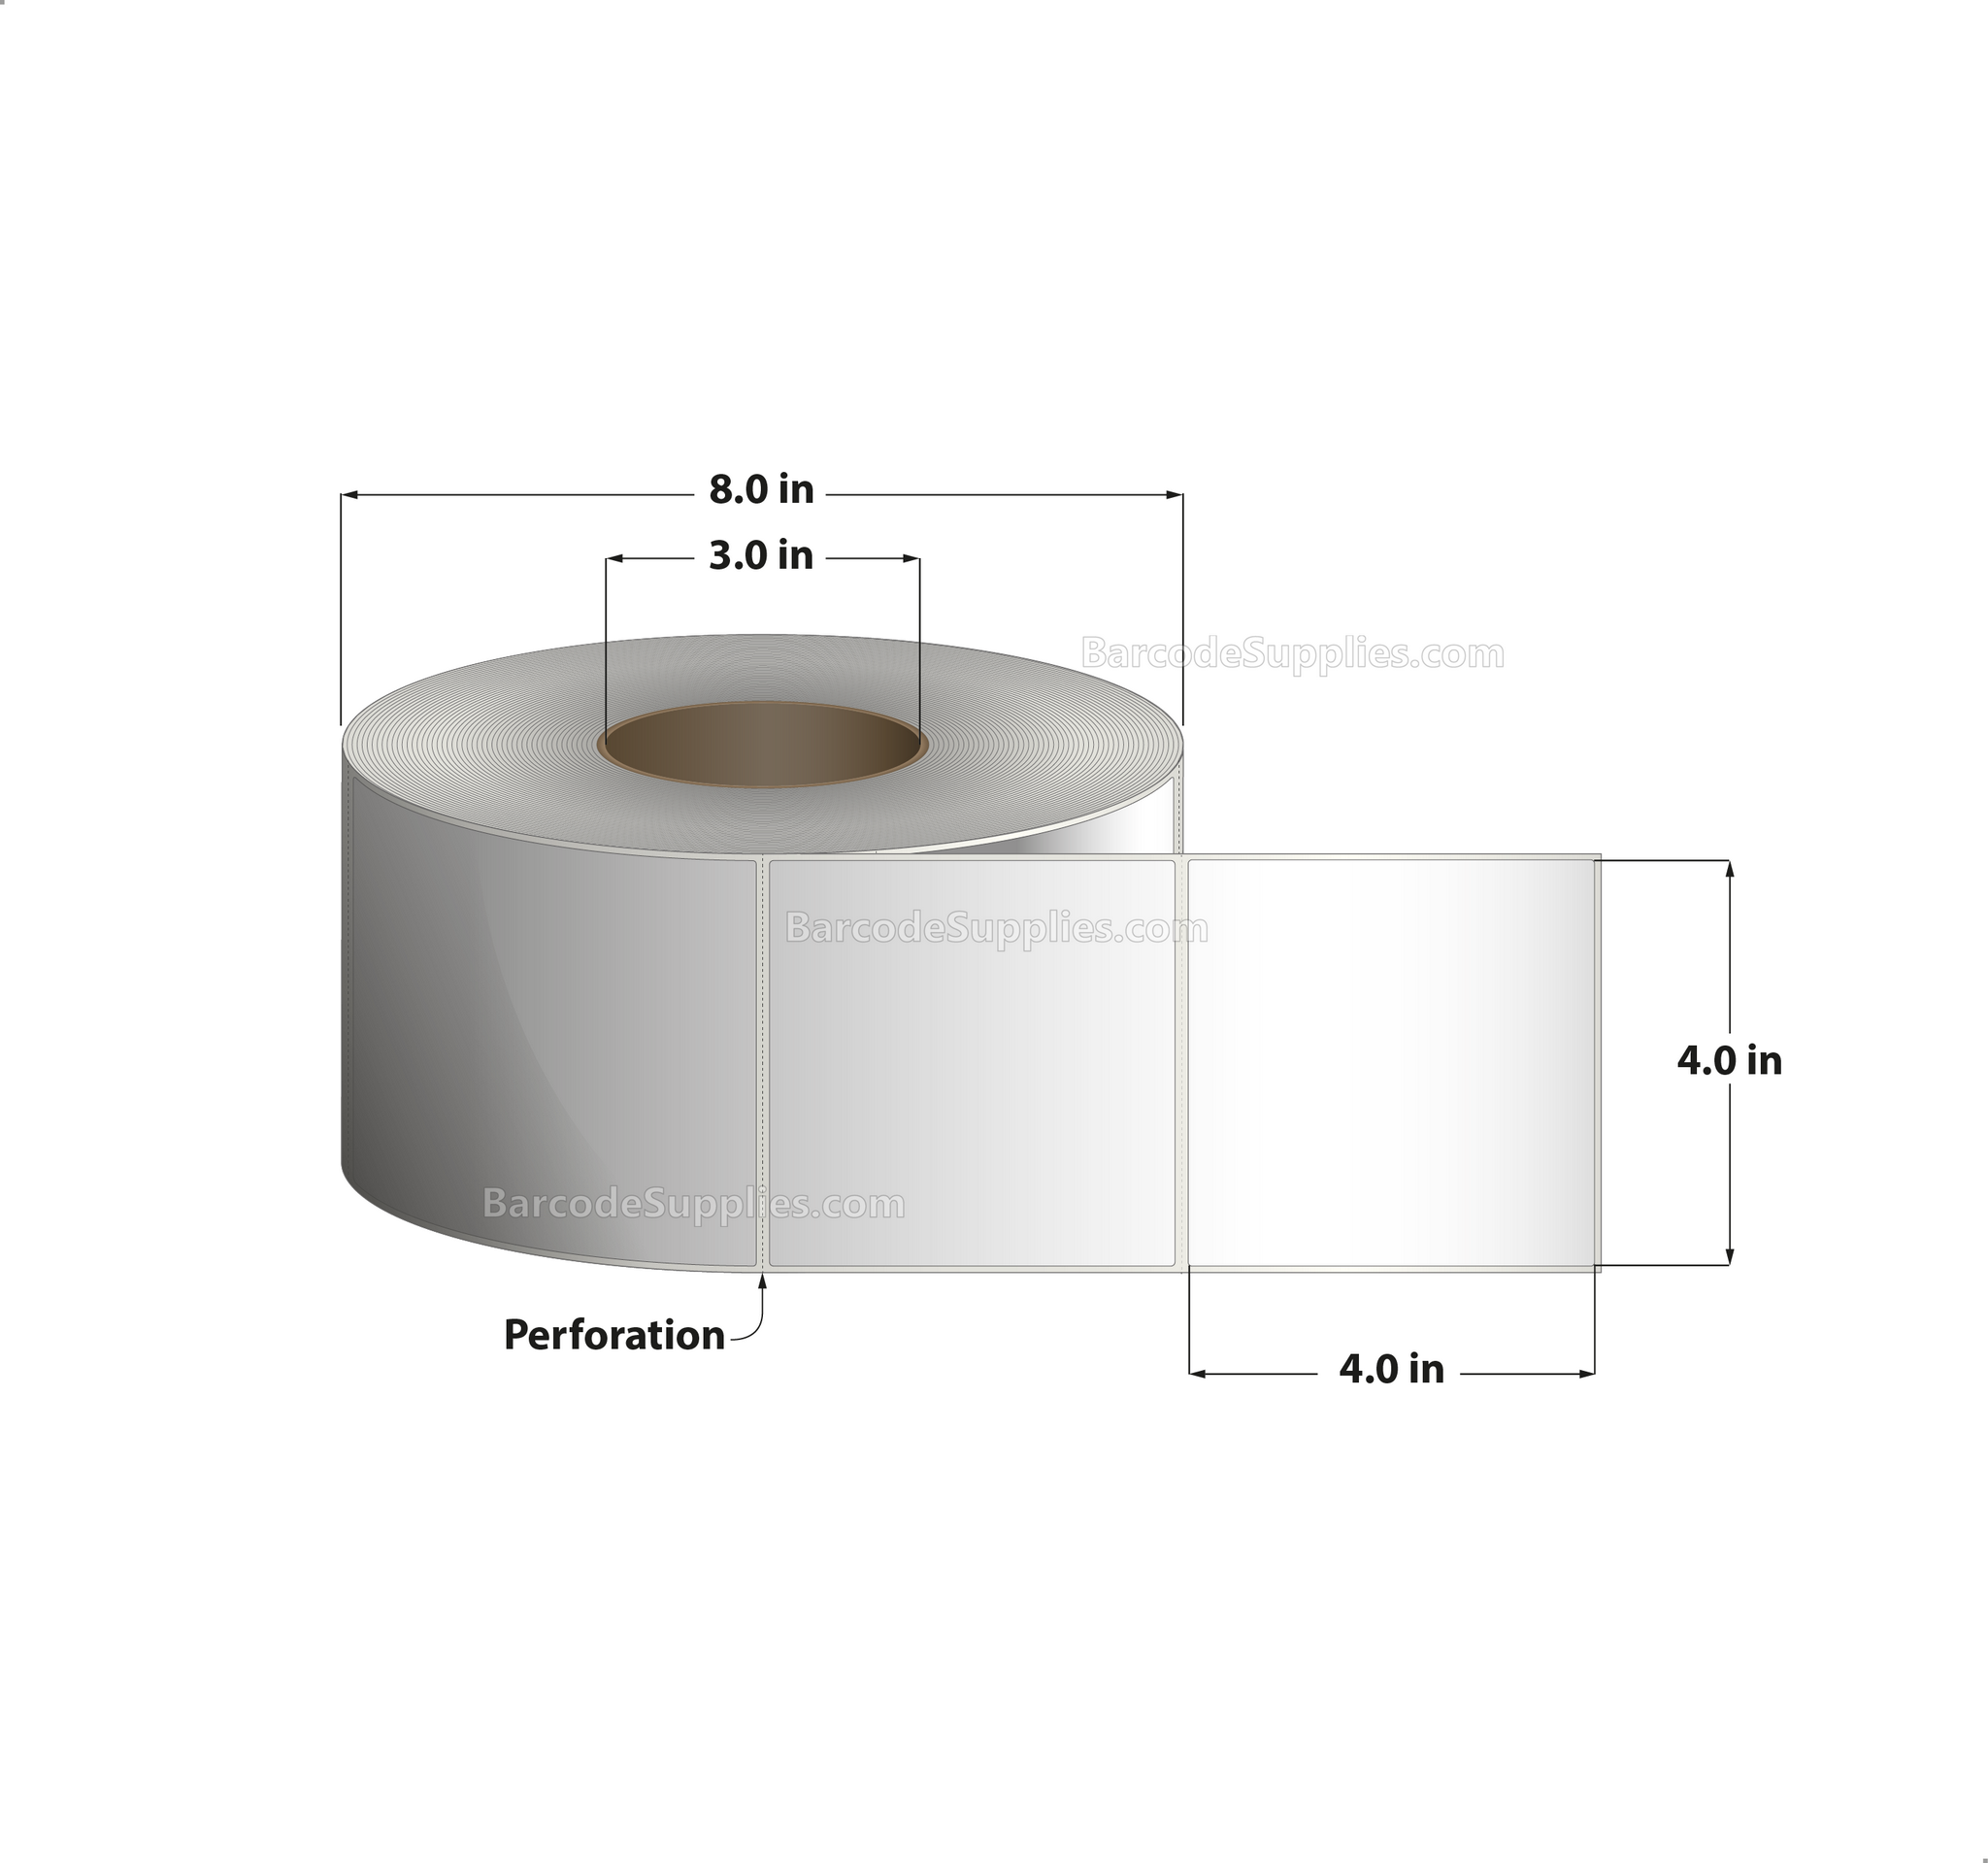 4 x 4 Direct Thermal White Labels With Permanent Acrylic Adhesive - Perforated - 1500 Labels Per Roll - Carton Of 4 Rolls - 6000 Labels Total - MPN: DT44-1P